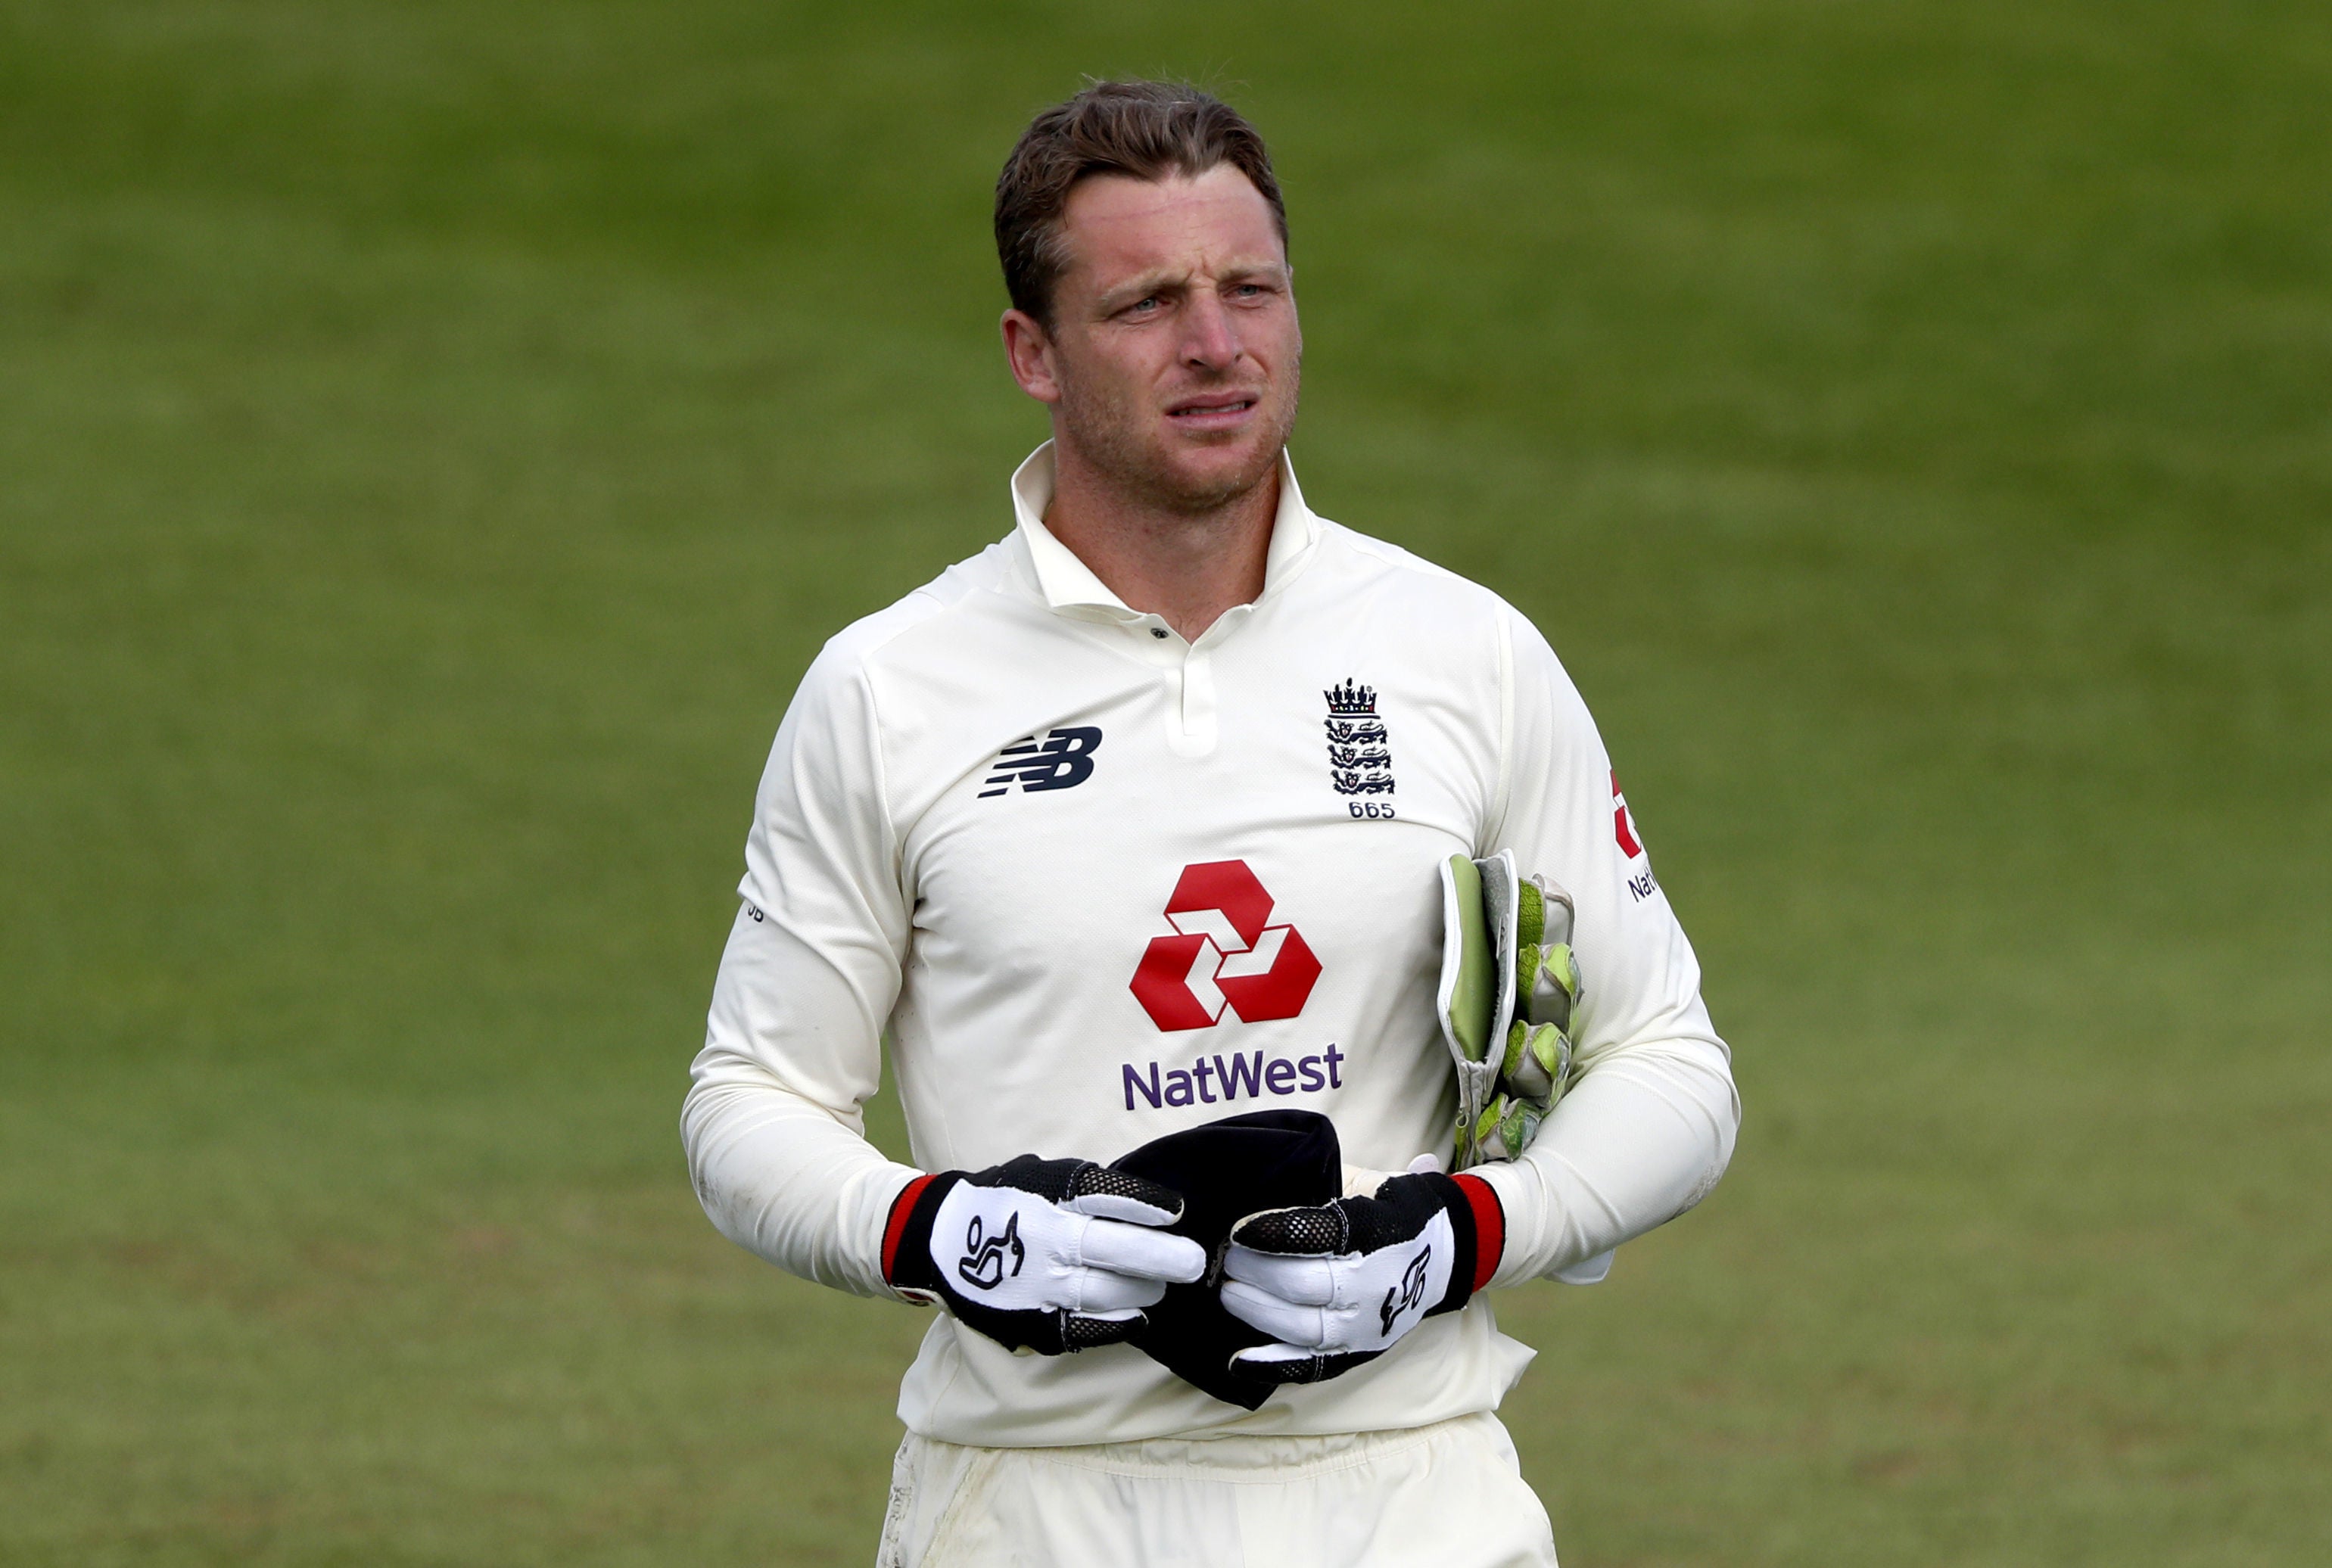 Jos Buttler will be part of England’s tour team in South Africa